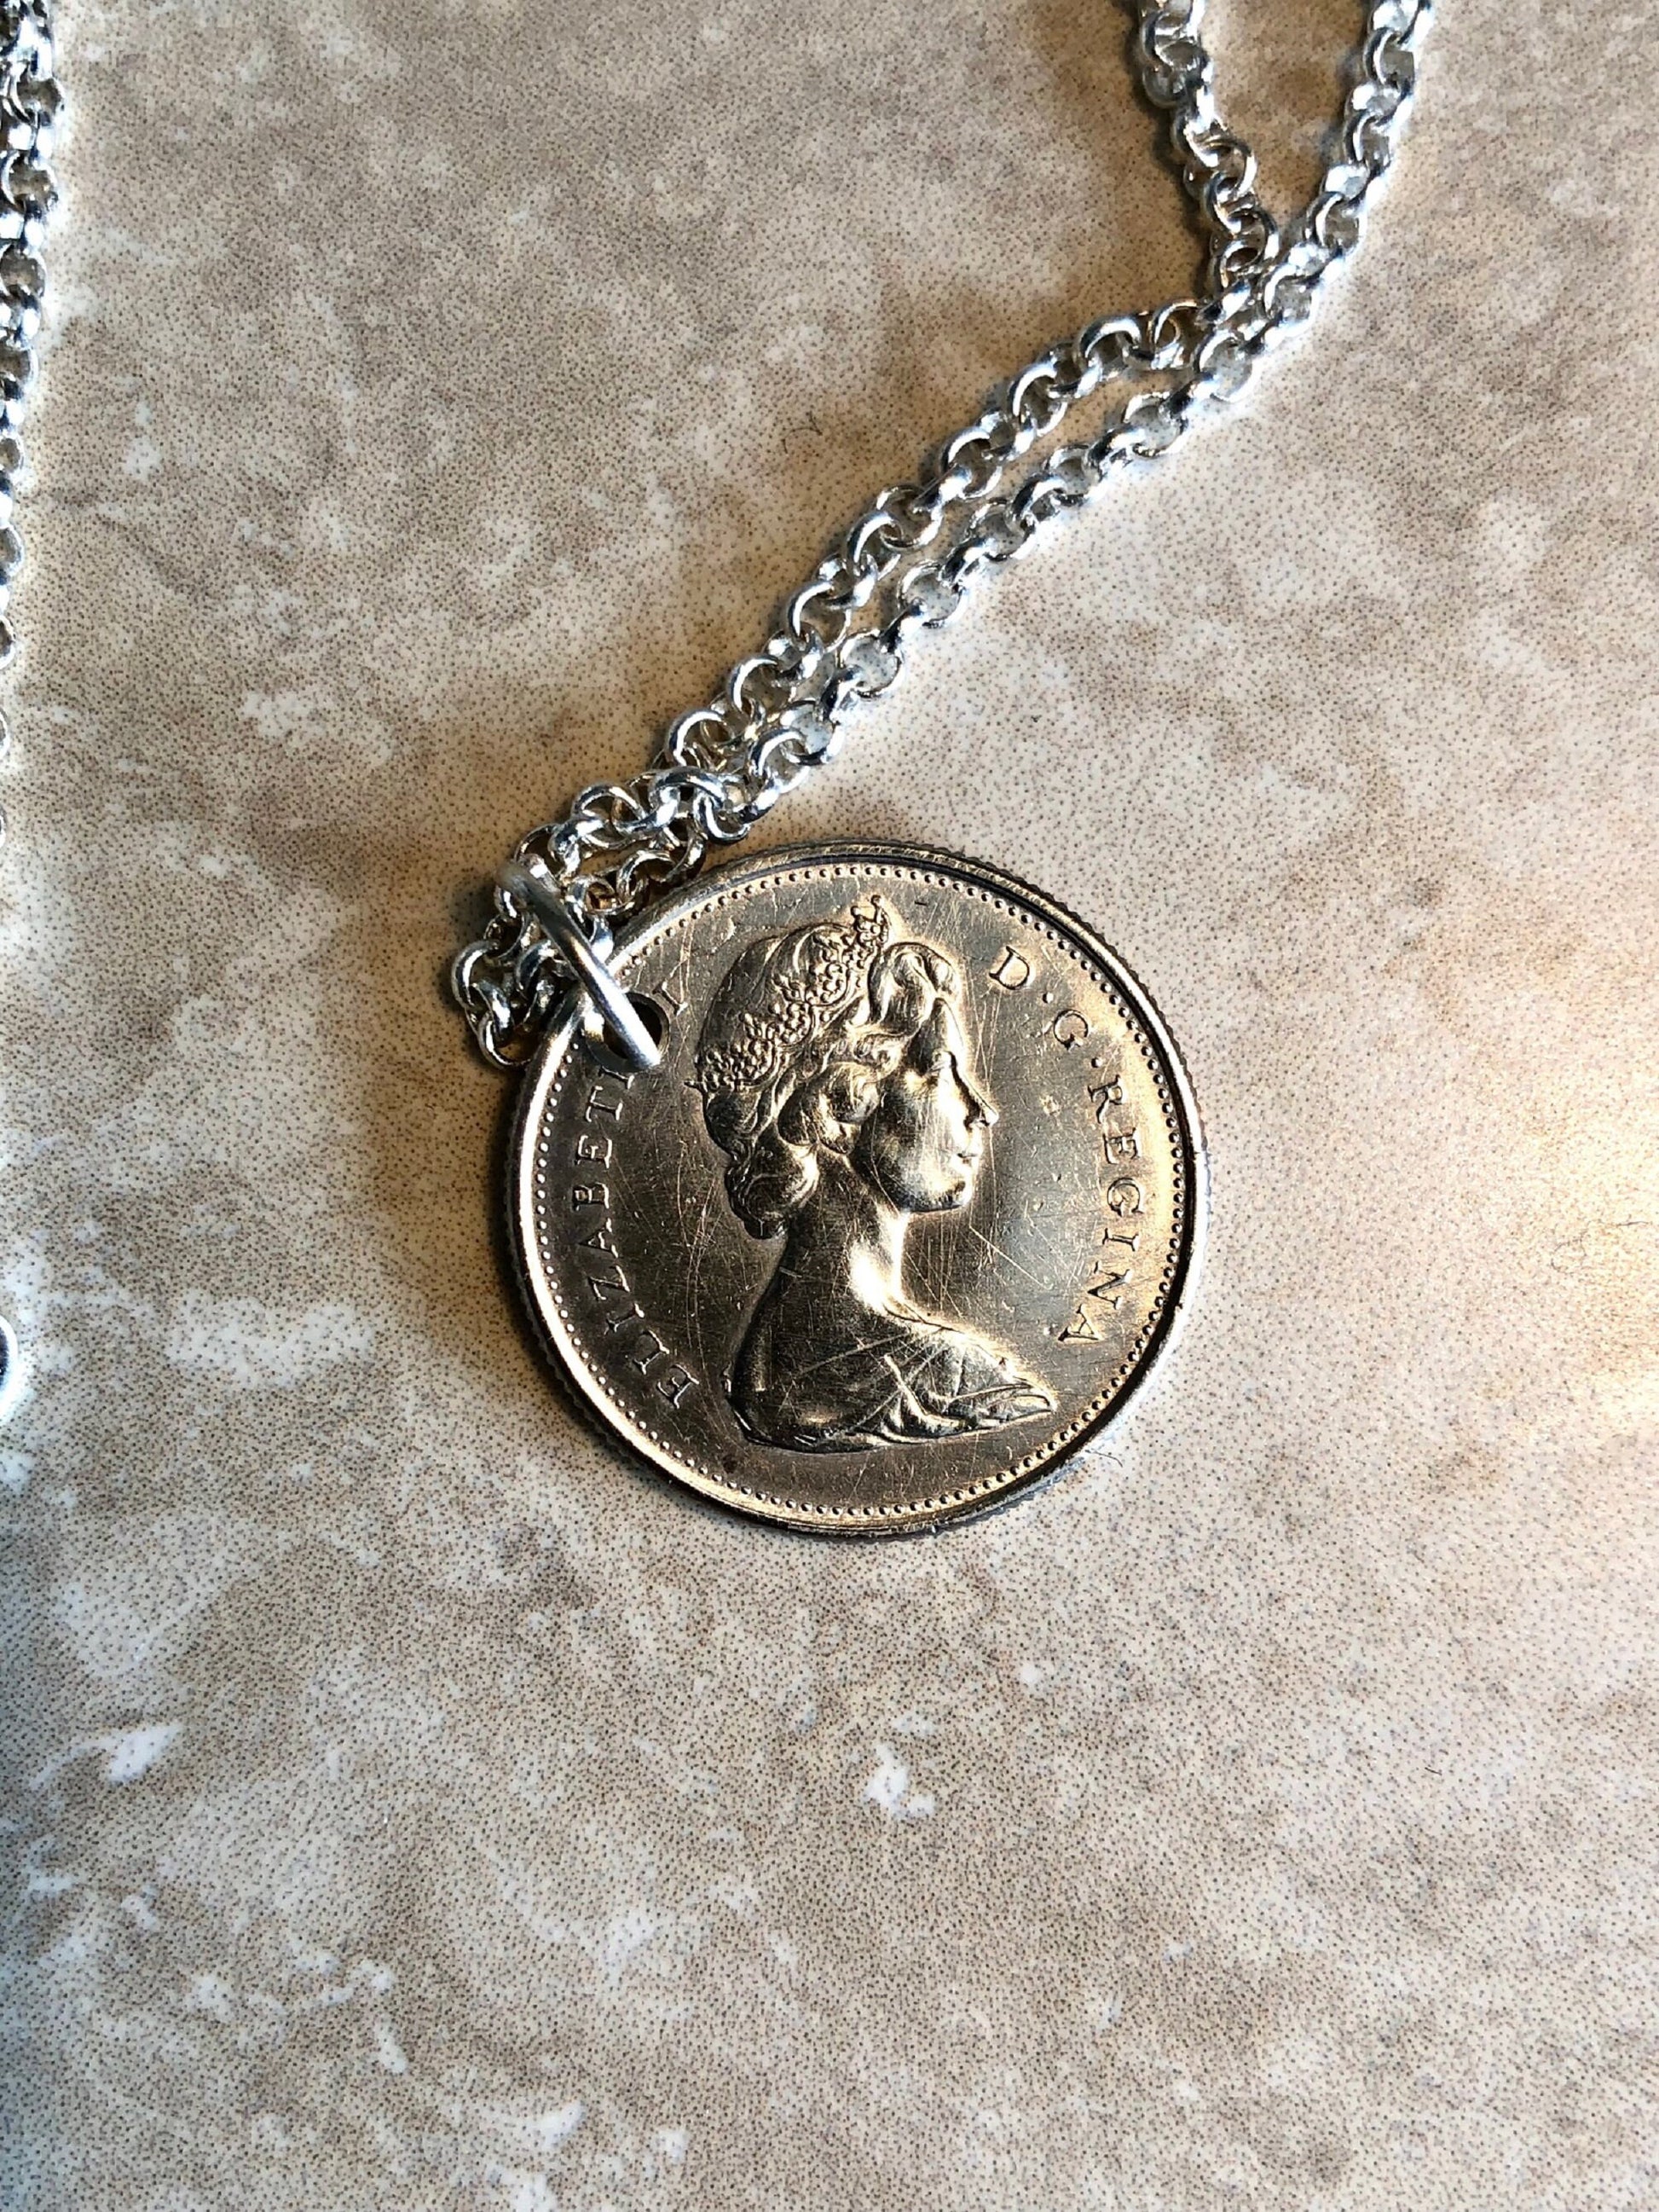 Canadian Quarter Coin Pendant Necklace Canada 1967 Silver 25 Cents Custom Made Vintage and Rare coins - Coin Enthusiast - Fashion Accessory.